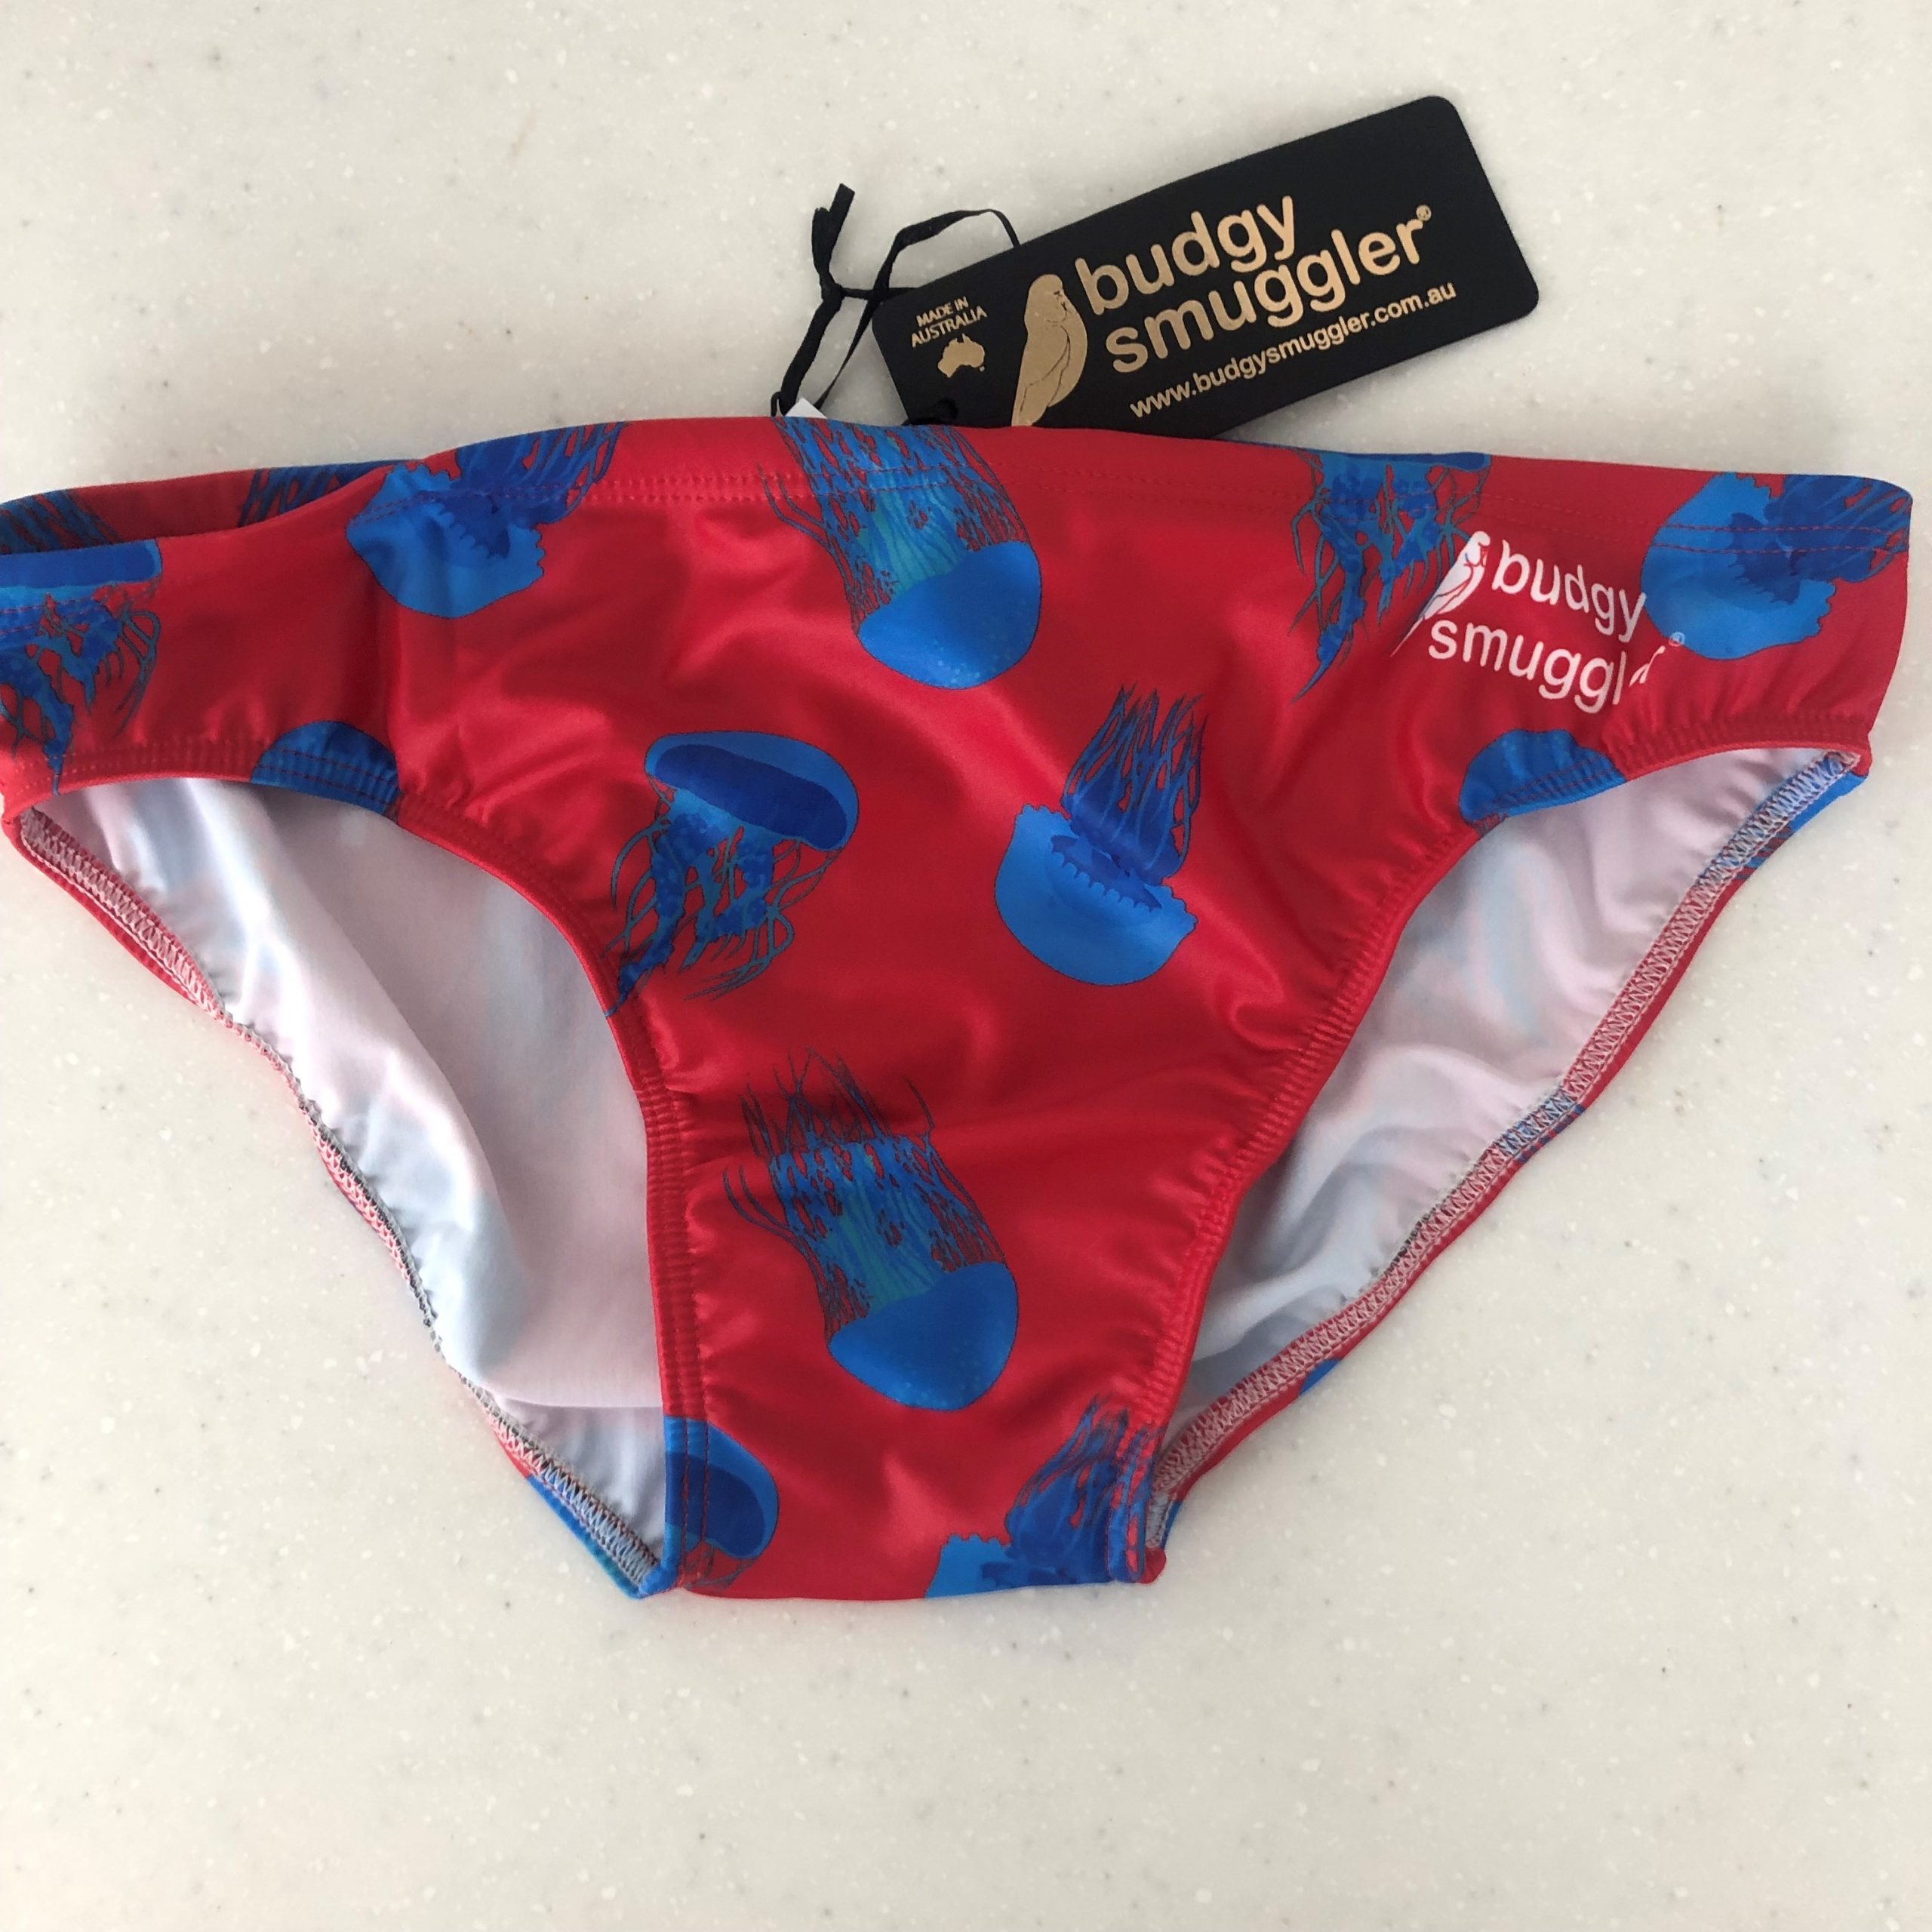 Boys Stingers – Budgy Smuggler – Queenscliff Surf Life Saving Club